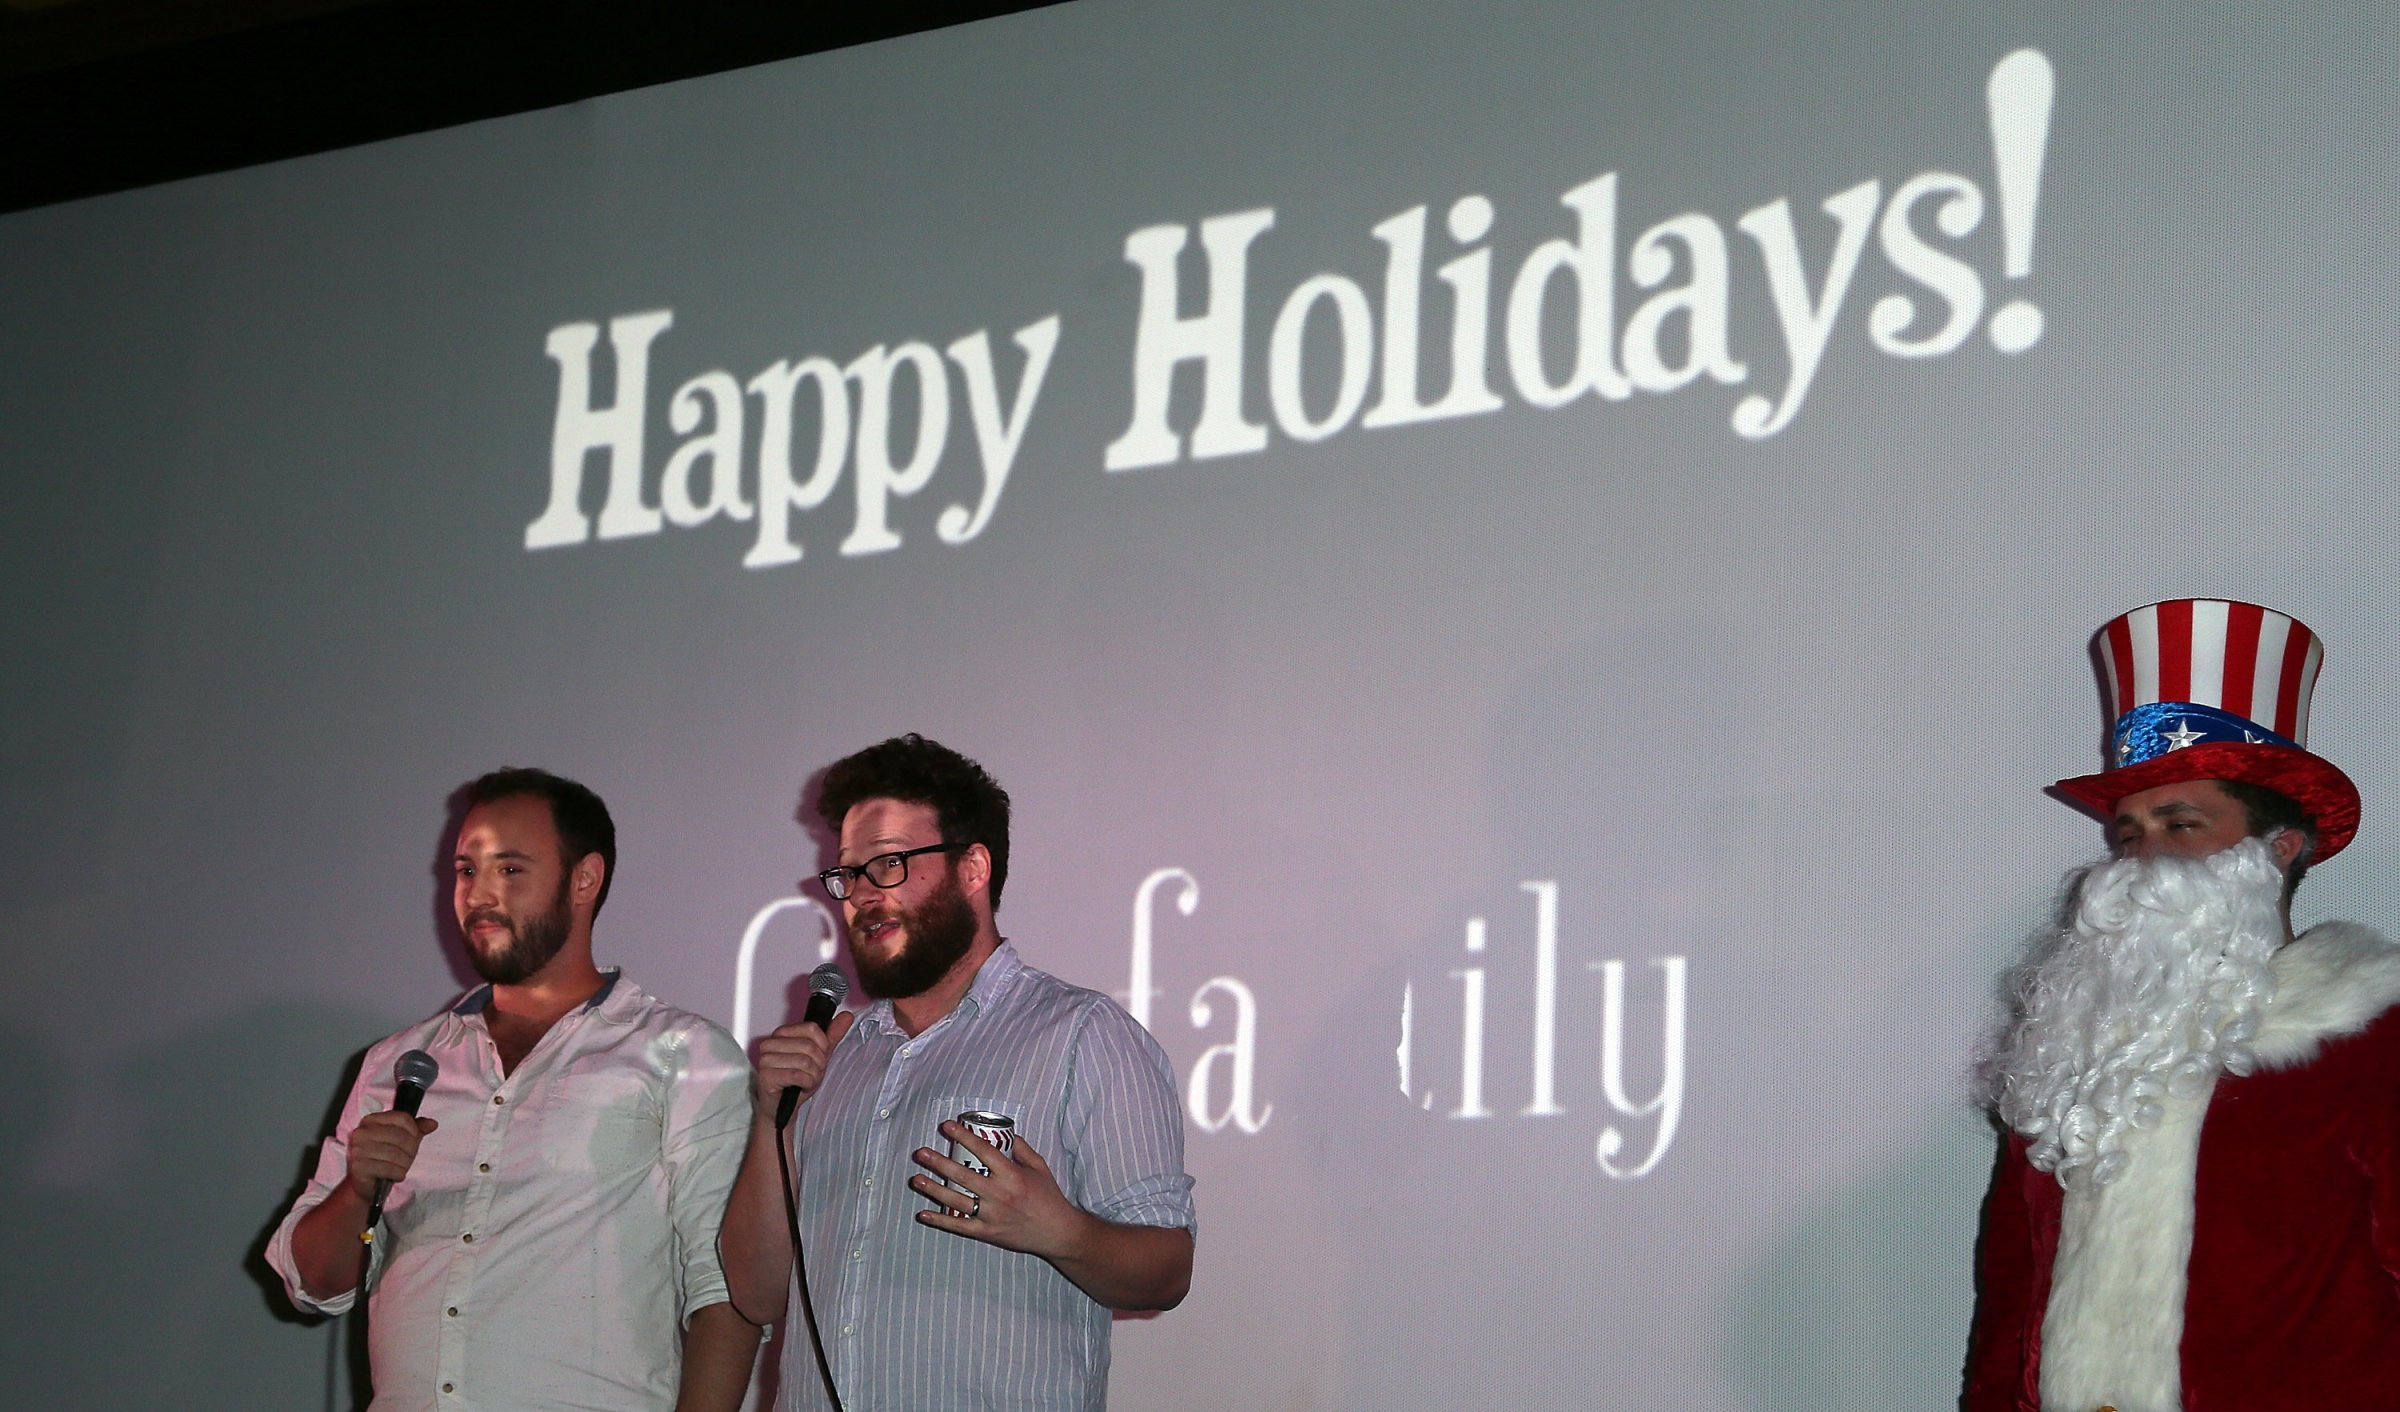 Writers/directors Evan Goldberg (L) and Seth Rogen introduce the screening of Sony Pictures' "The Interview" at Cinefamily on Dec. 25, 2014 in Los Angeles.